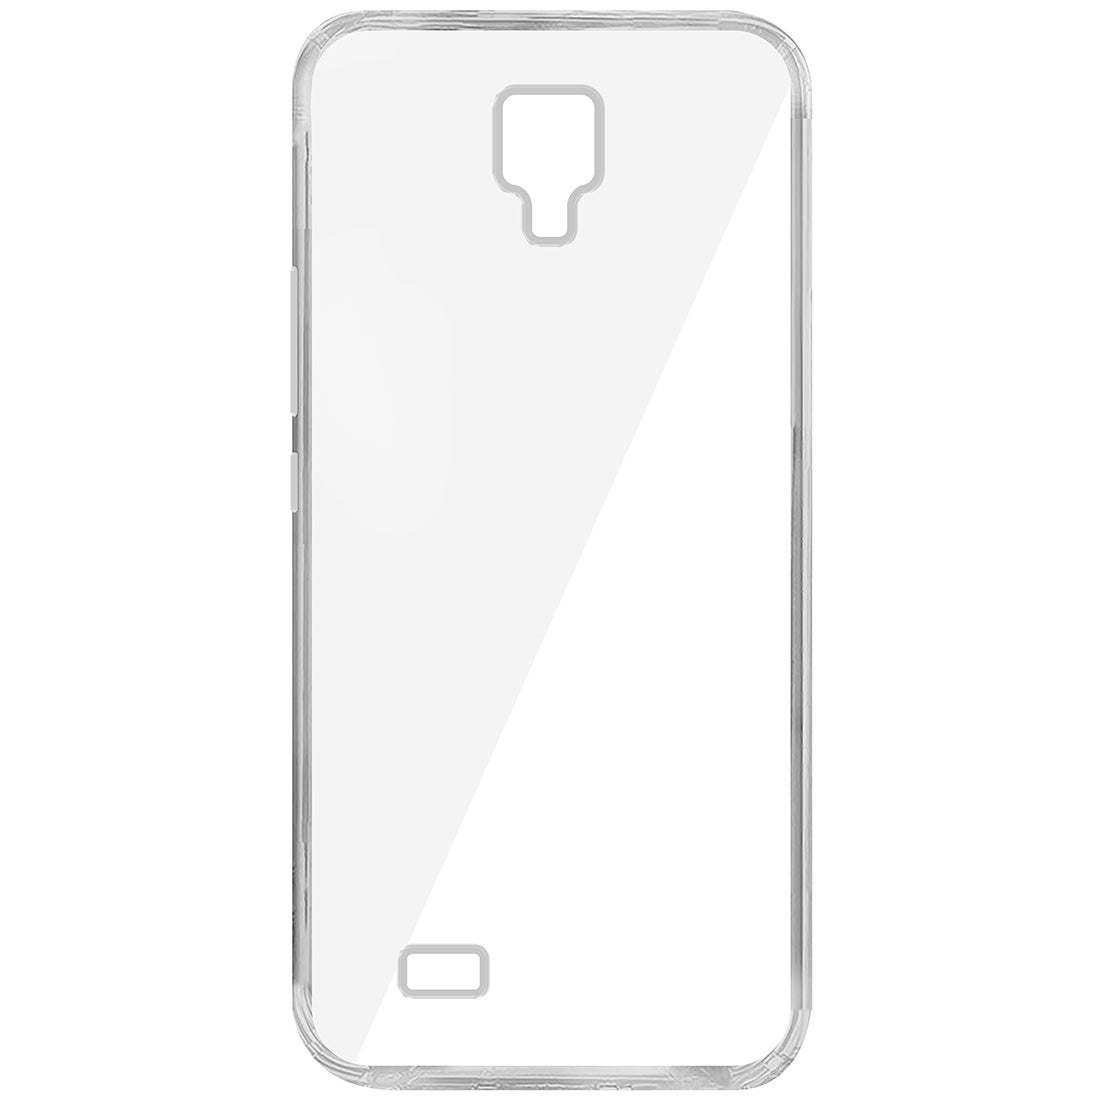 Clear Case for Gionee P2S